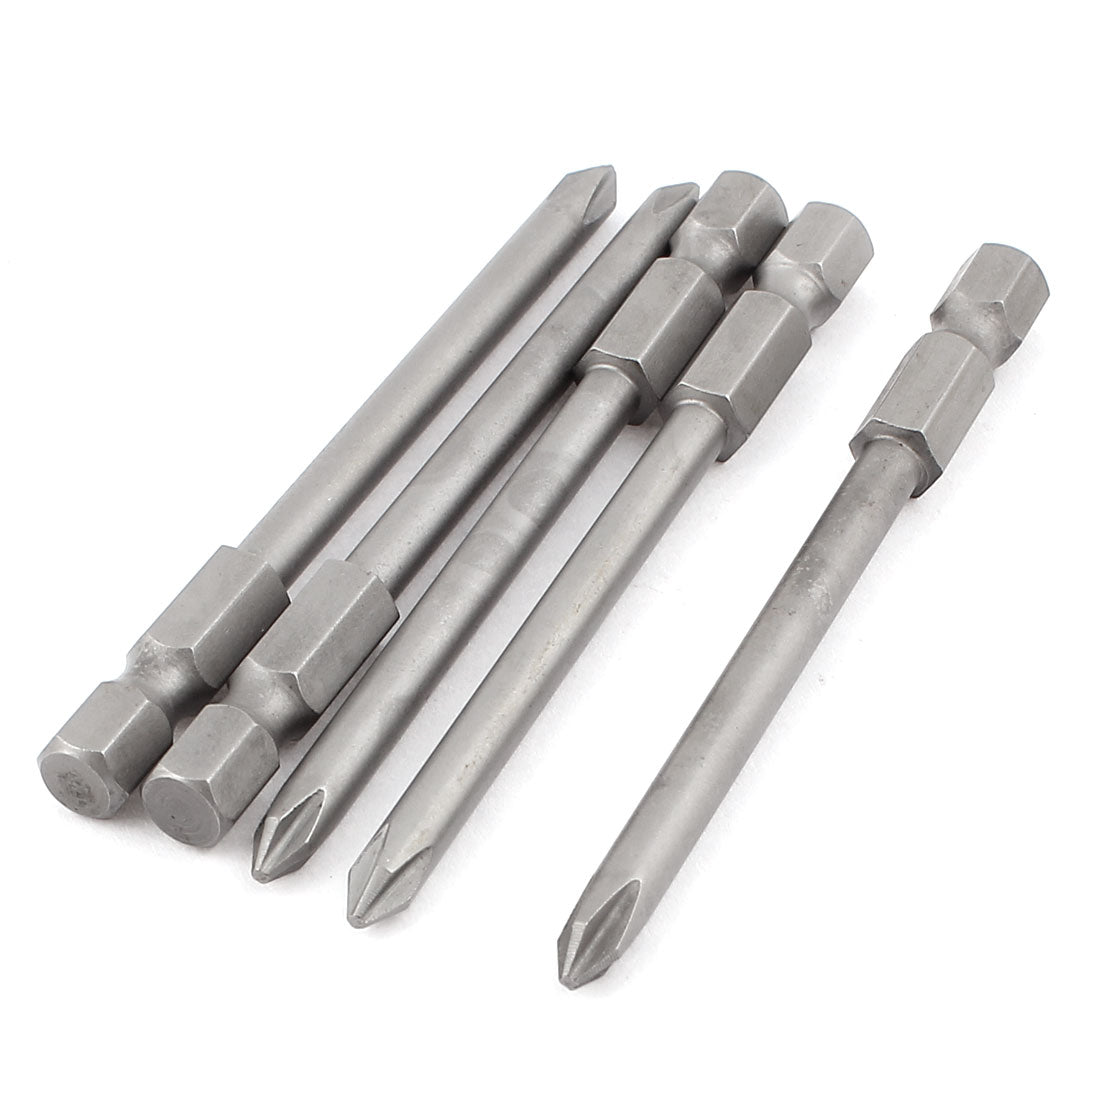 Uxcell Uxcell 5pcs 1/4" Hex Shank 2.5mm PH1 Magnetic Phillips Crosshead Screwdriver Bits 100mm